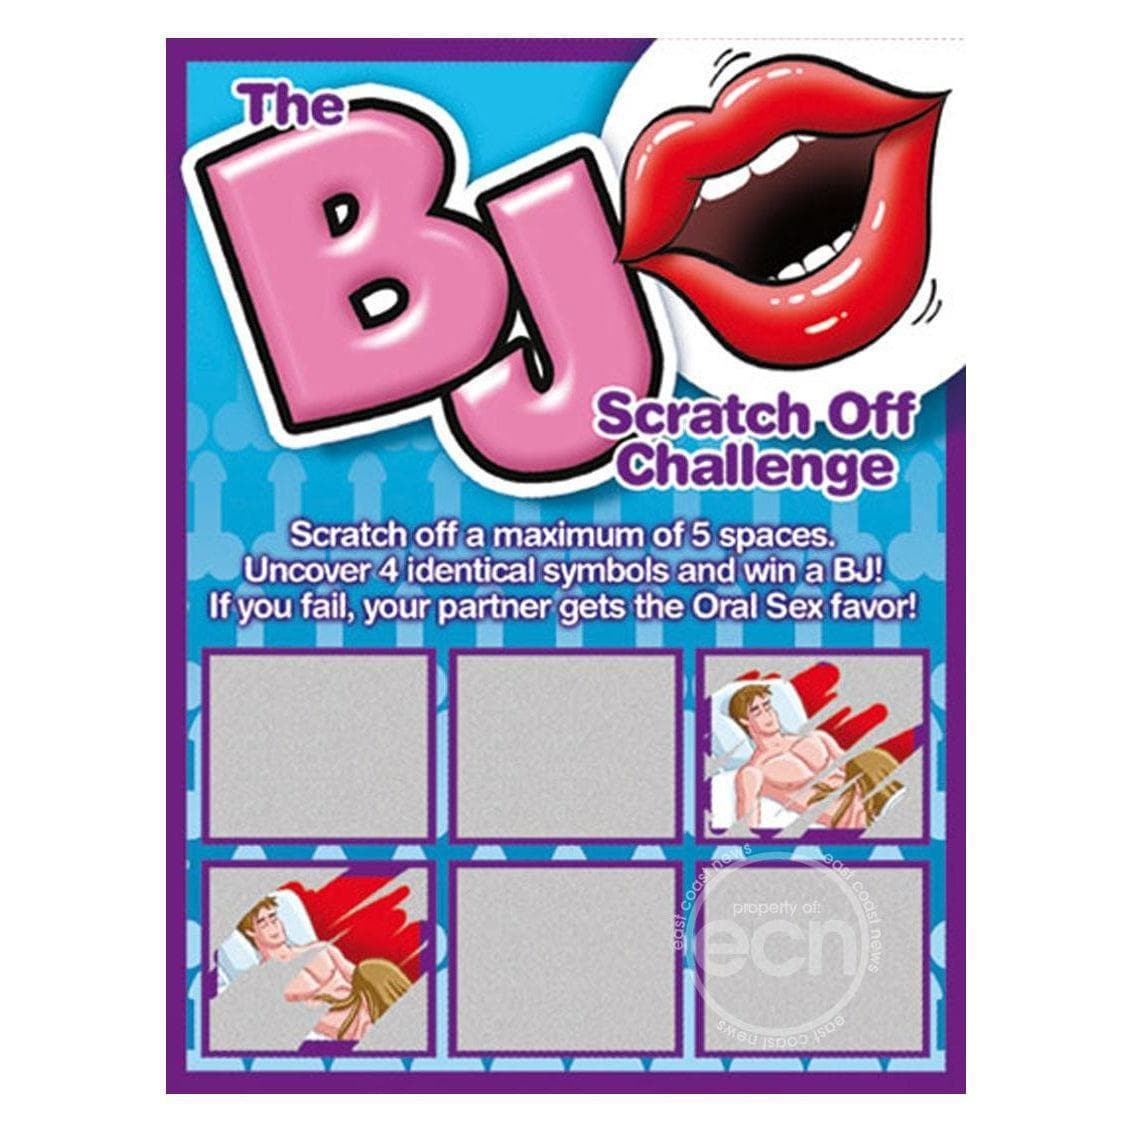 BJ Scratch Off Challenge Game Ticket - Romantic Blessings